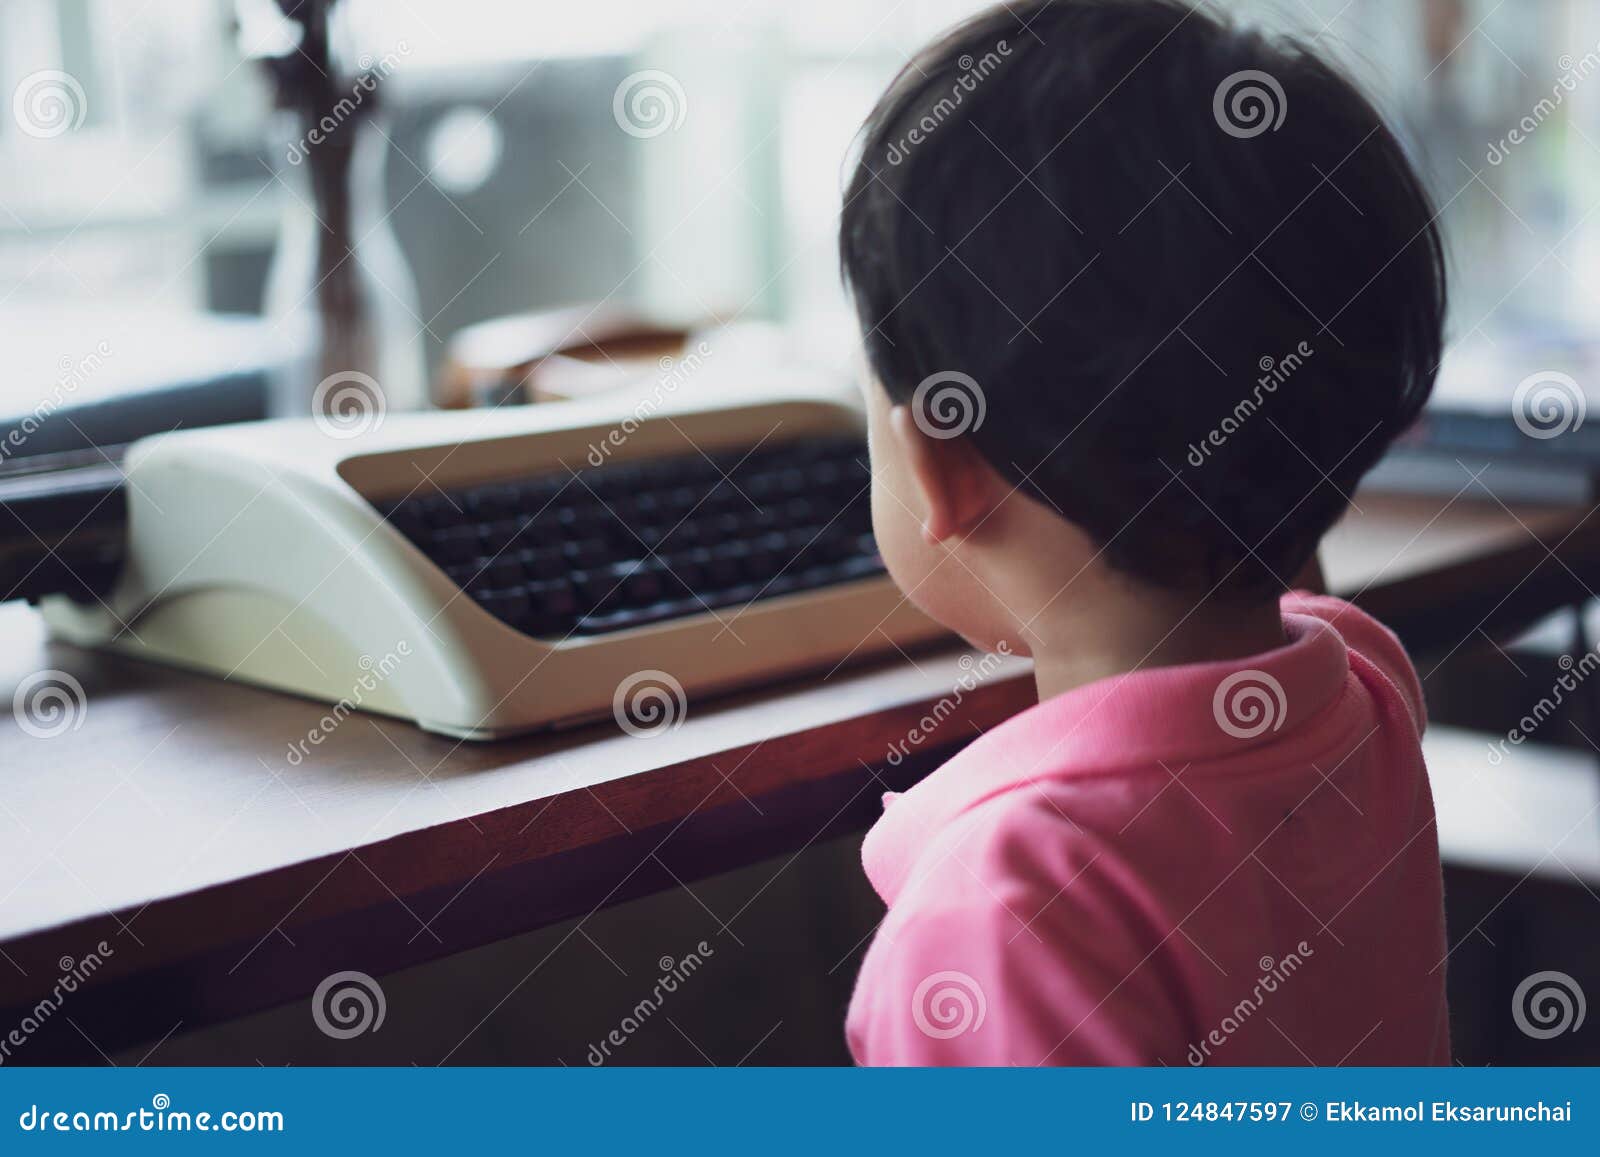 A Boy Is Typing On The Typewriter At The Coffee Cafe Stock Image